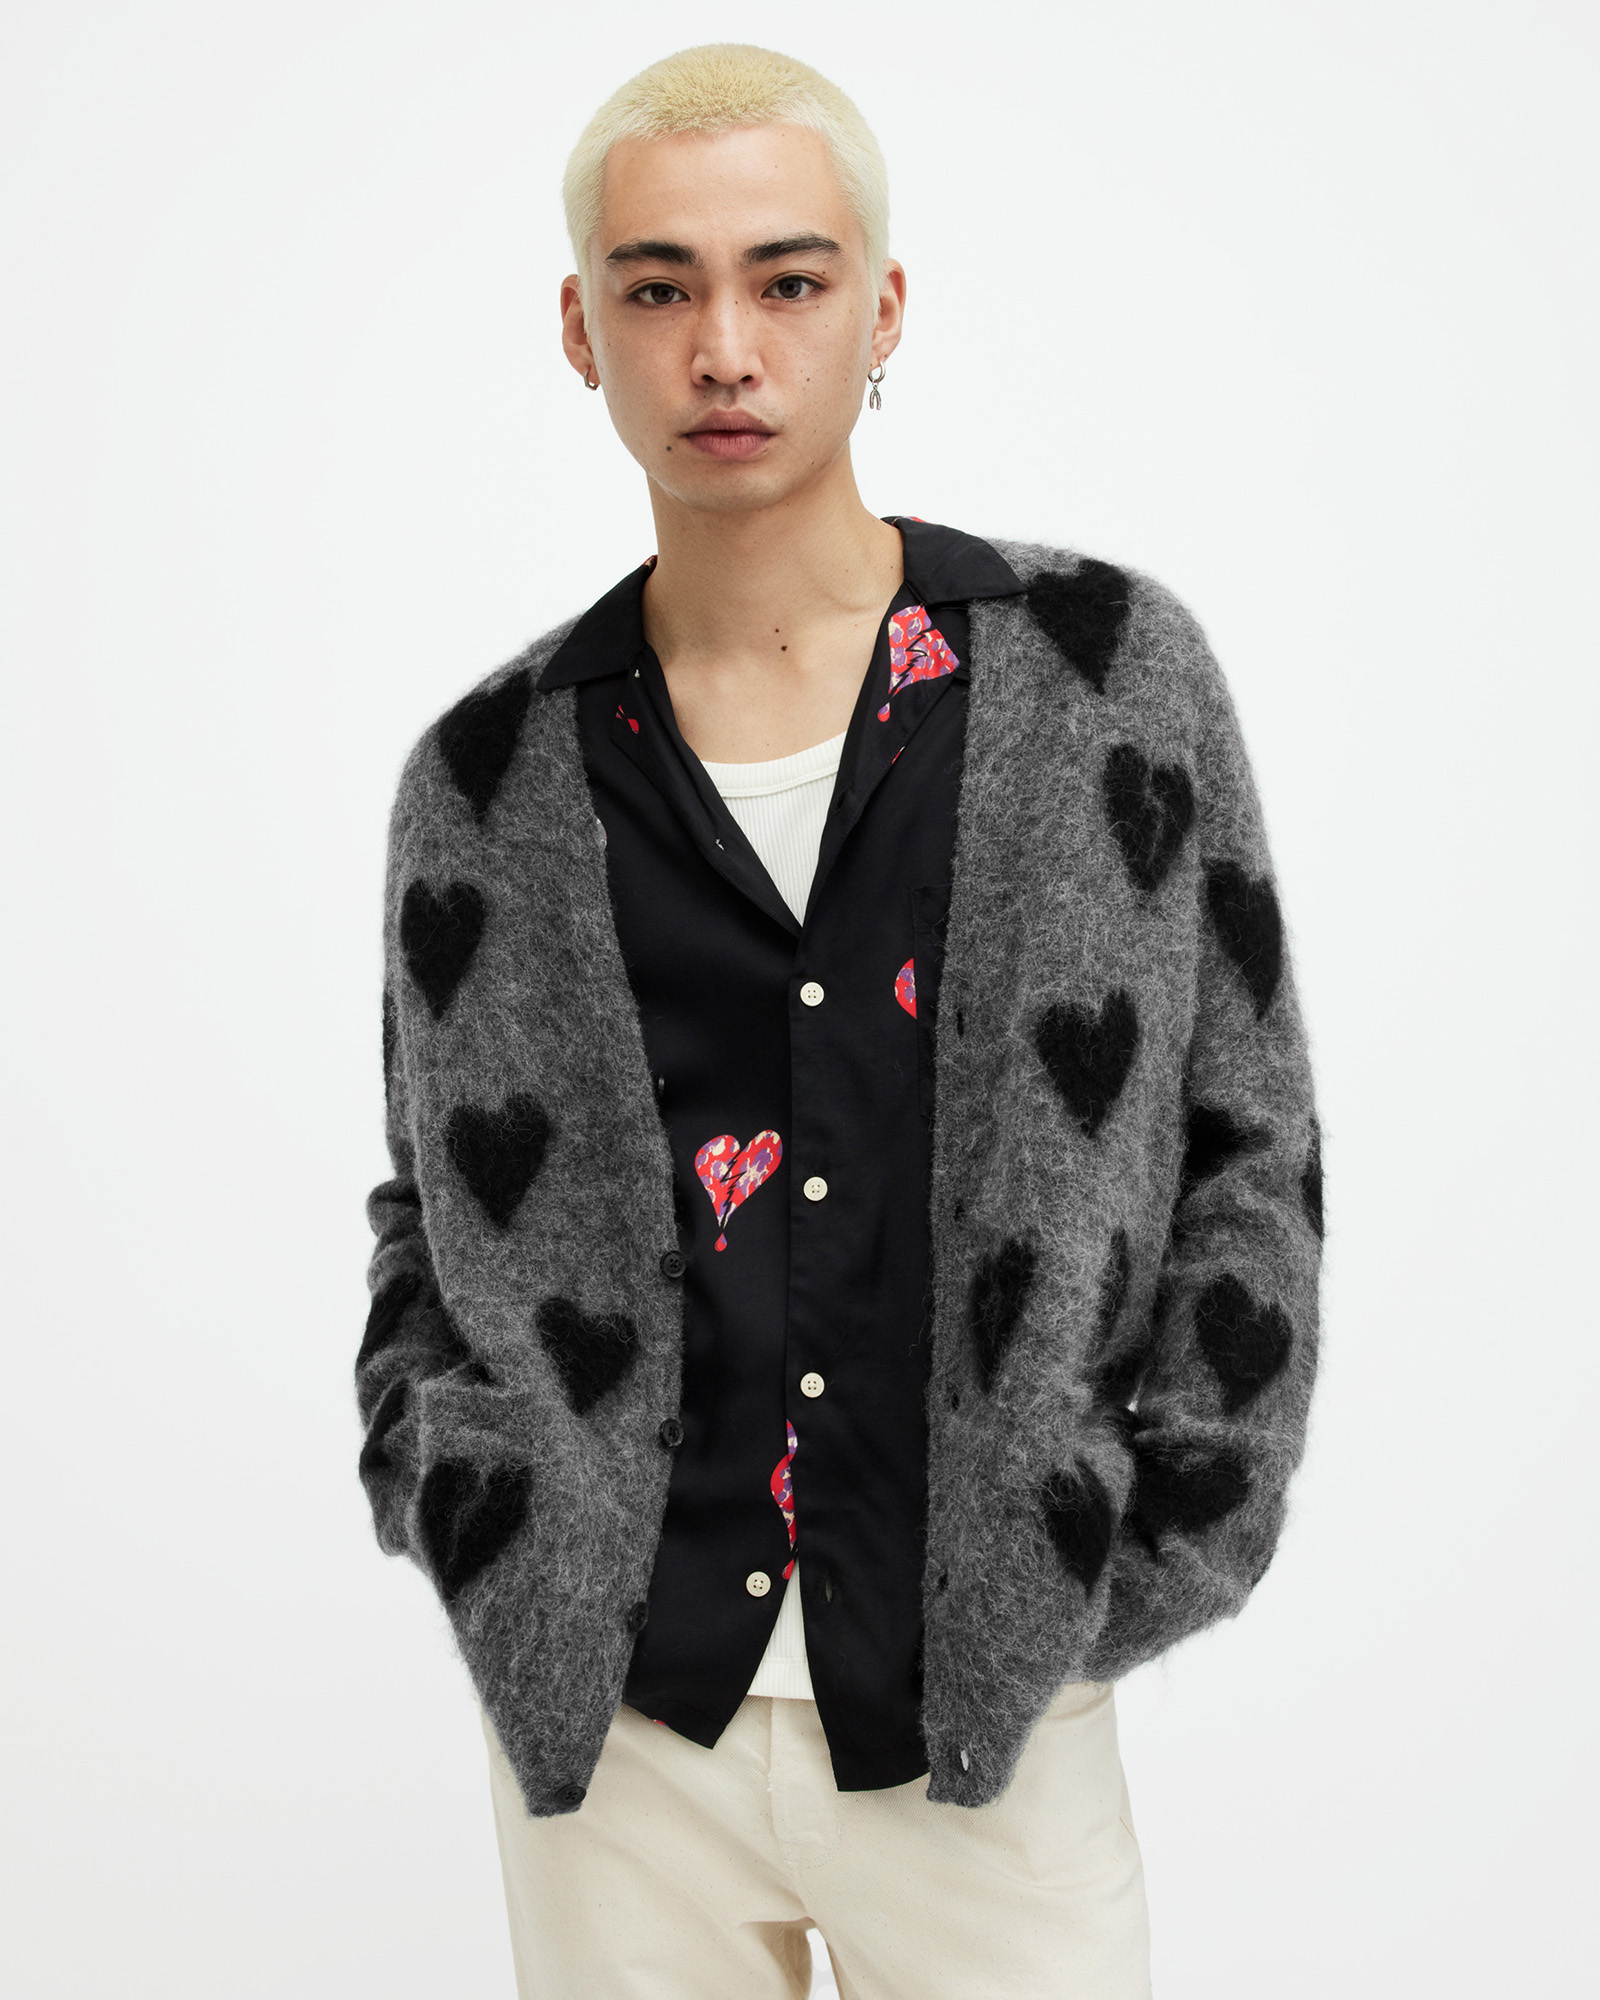 AllSaints Amore Heart Motif Relaxed Fit Cardigan,, Grey/Black